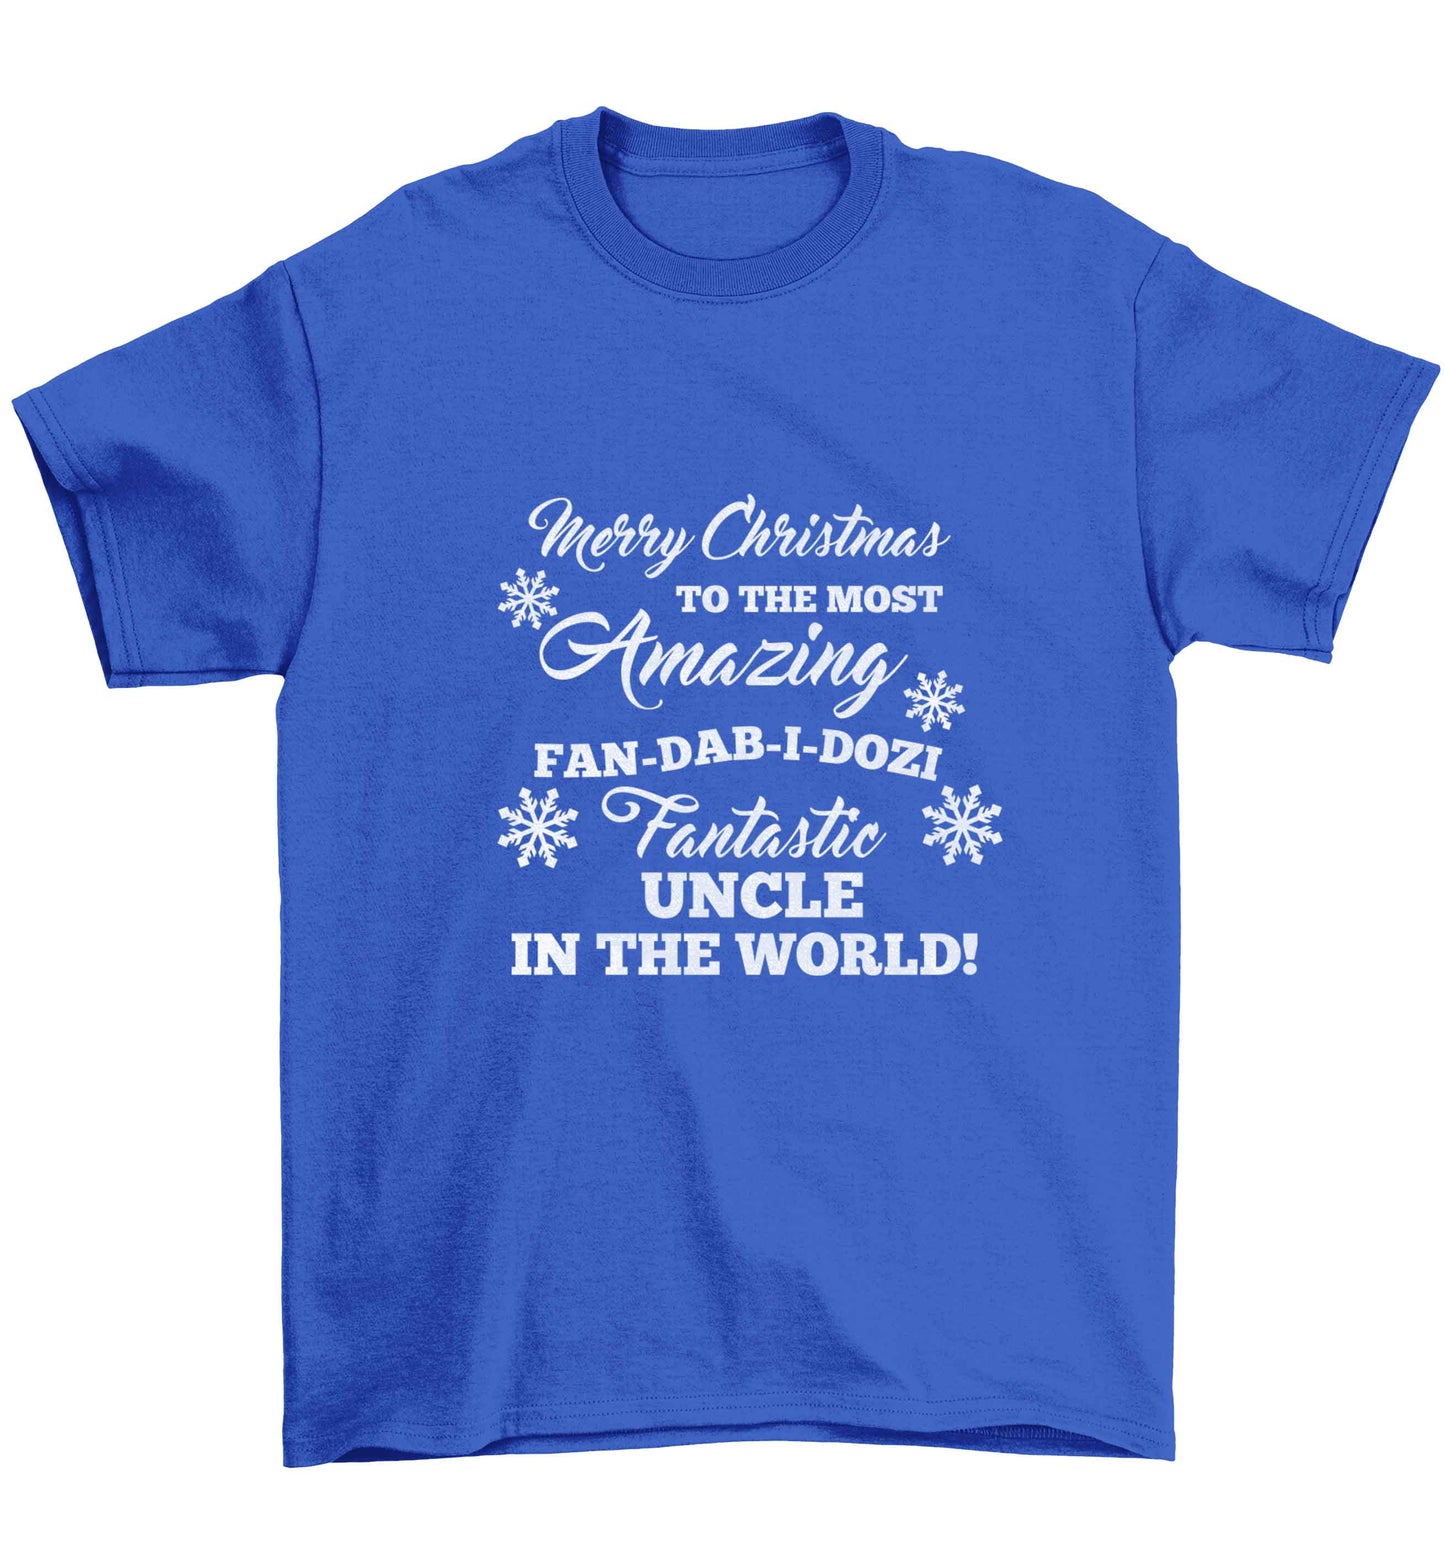 Merry Christmas to the most amazing fan-dab-i-dozi fantasic Uncle in the world Children's blue Tshirt 12-13 Years